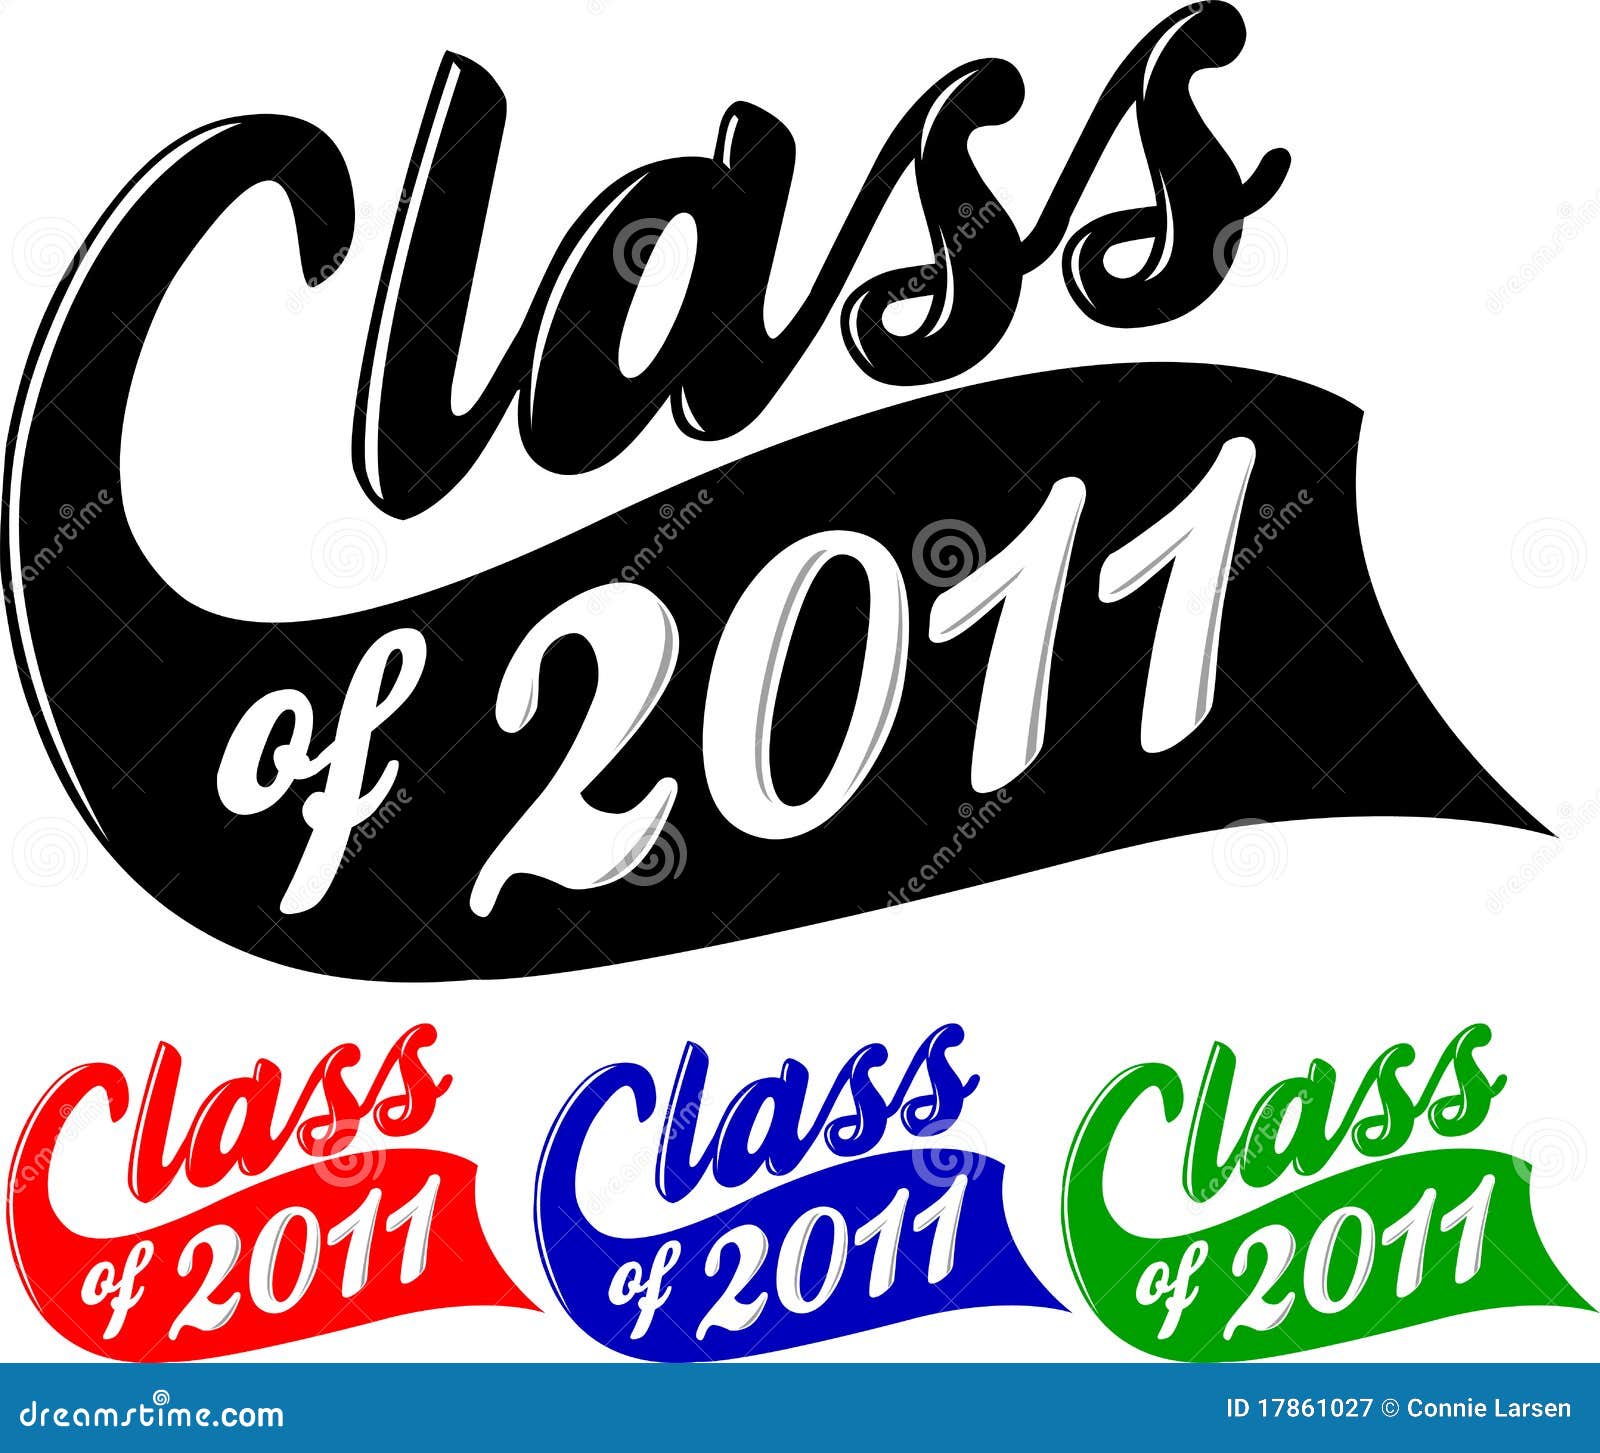 Class Of 2011 Royalty Free Stock Photography - Image: 17861027